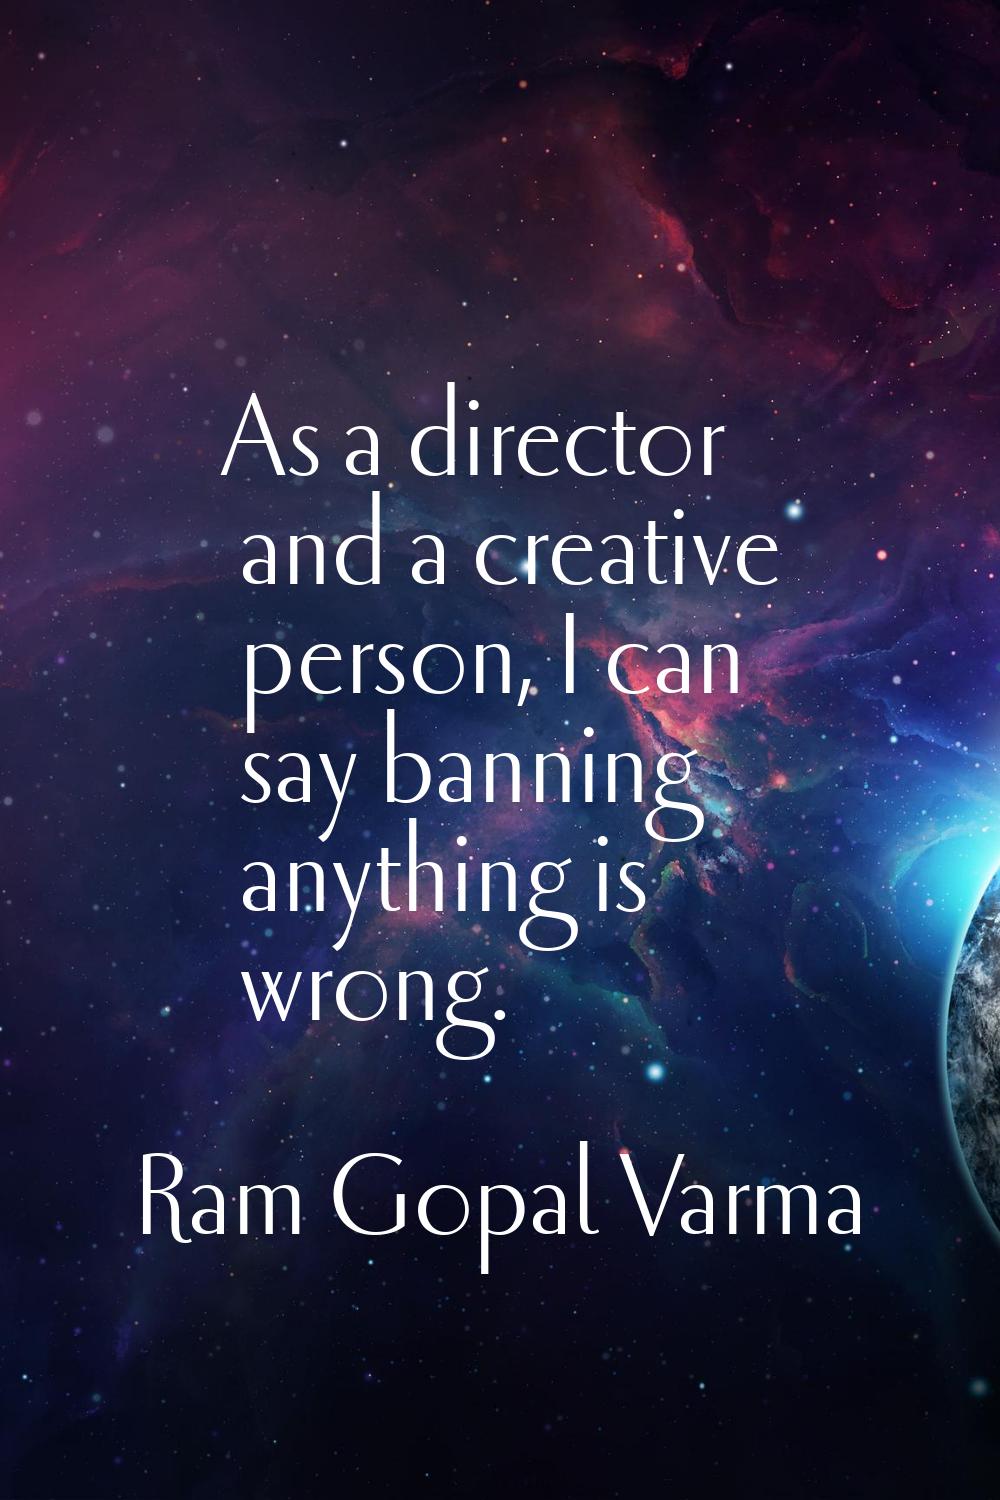 As a director and a creative person, I can say banning anything is wrong.